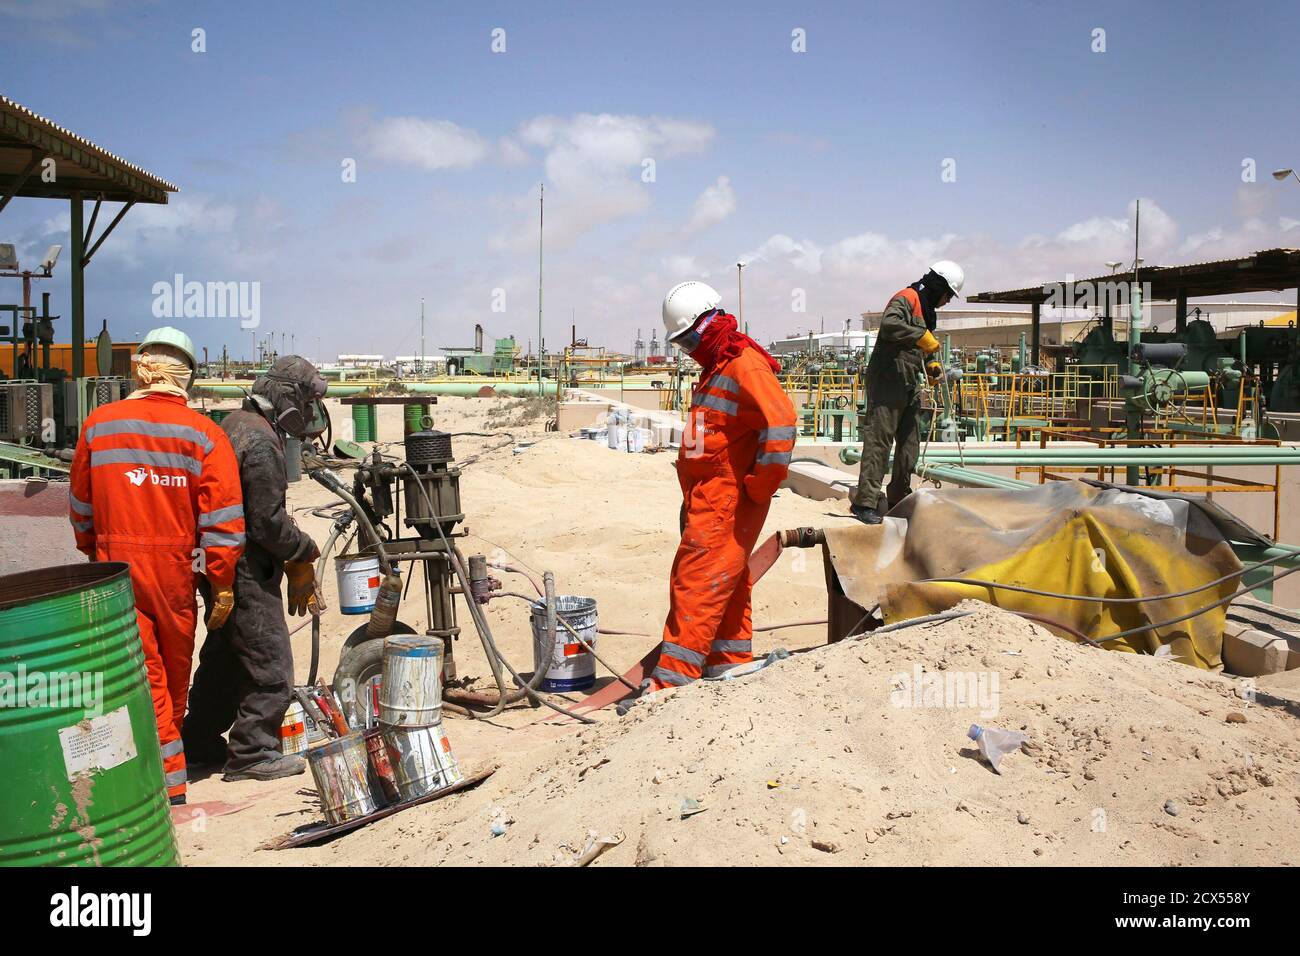 Workers conduct maintenance work on oil pipelines at the Zueitina oil terminal in Zueitina, west of Benghazi April 7, 2014. Libya's Zueitina oil port prepared on Monday to load crude on tankers after the government reached a deal with rebels to reopen four terminals that insurgents have occupied since summer. The federalist rebels agreed on Sunday to end gradually their eight-month blockade of Zueitina, Hariga, Ras Lanuf and Es Sider ports, which account for around 700,000 barrels per day of the OPEC country's crude exports. REUTERS/Esam Omran Al-Fetori (LIBYA  - Tags: POLITICS ENERGY BUSINESS Stock Photo